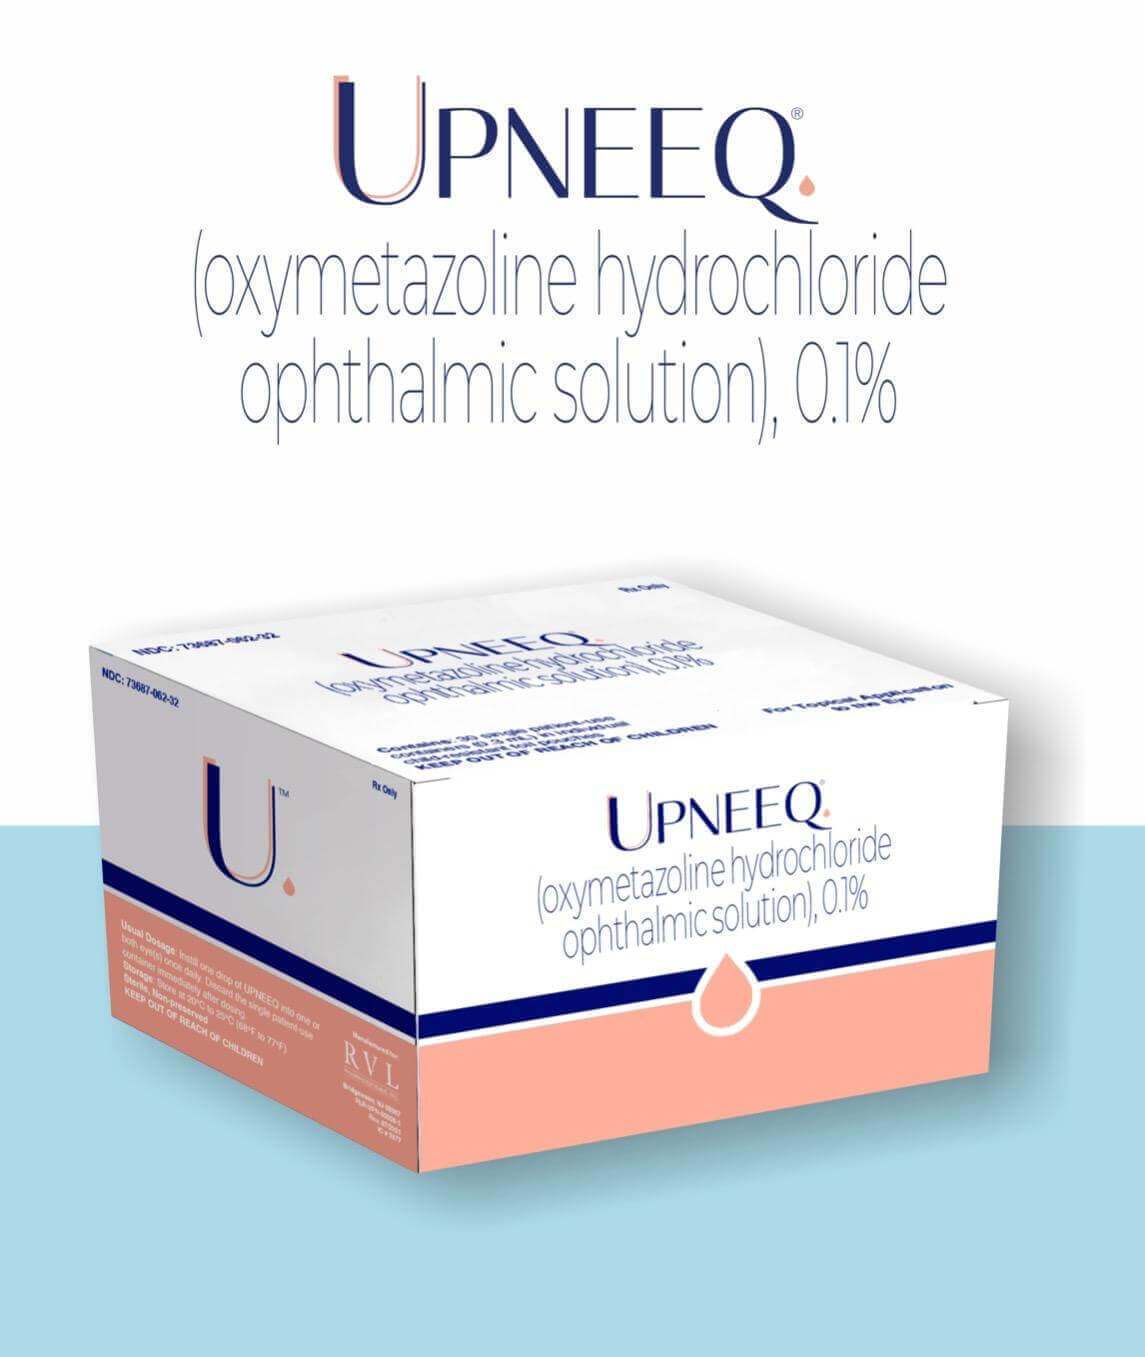 With daily use, Upneeq eye drops lift the upper eyelid, giving patients a more lifted, smooth, and youthful look.